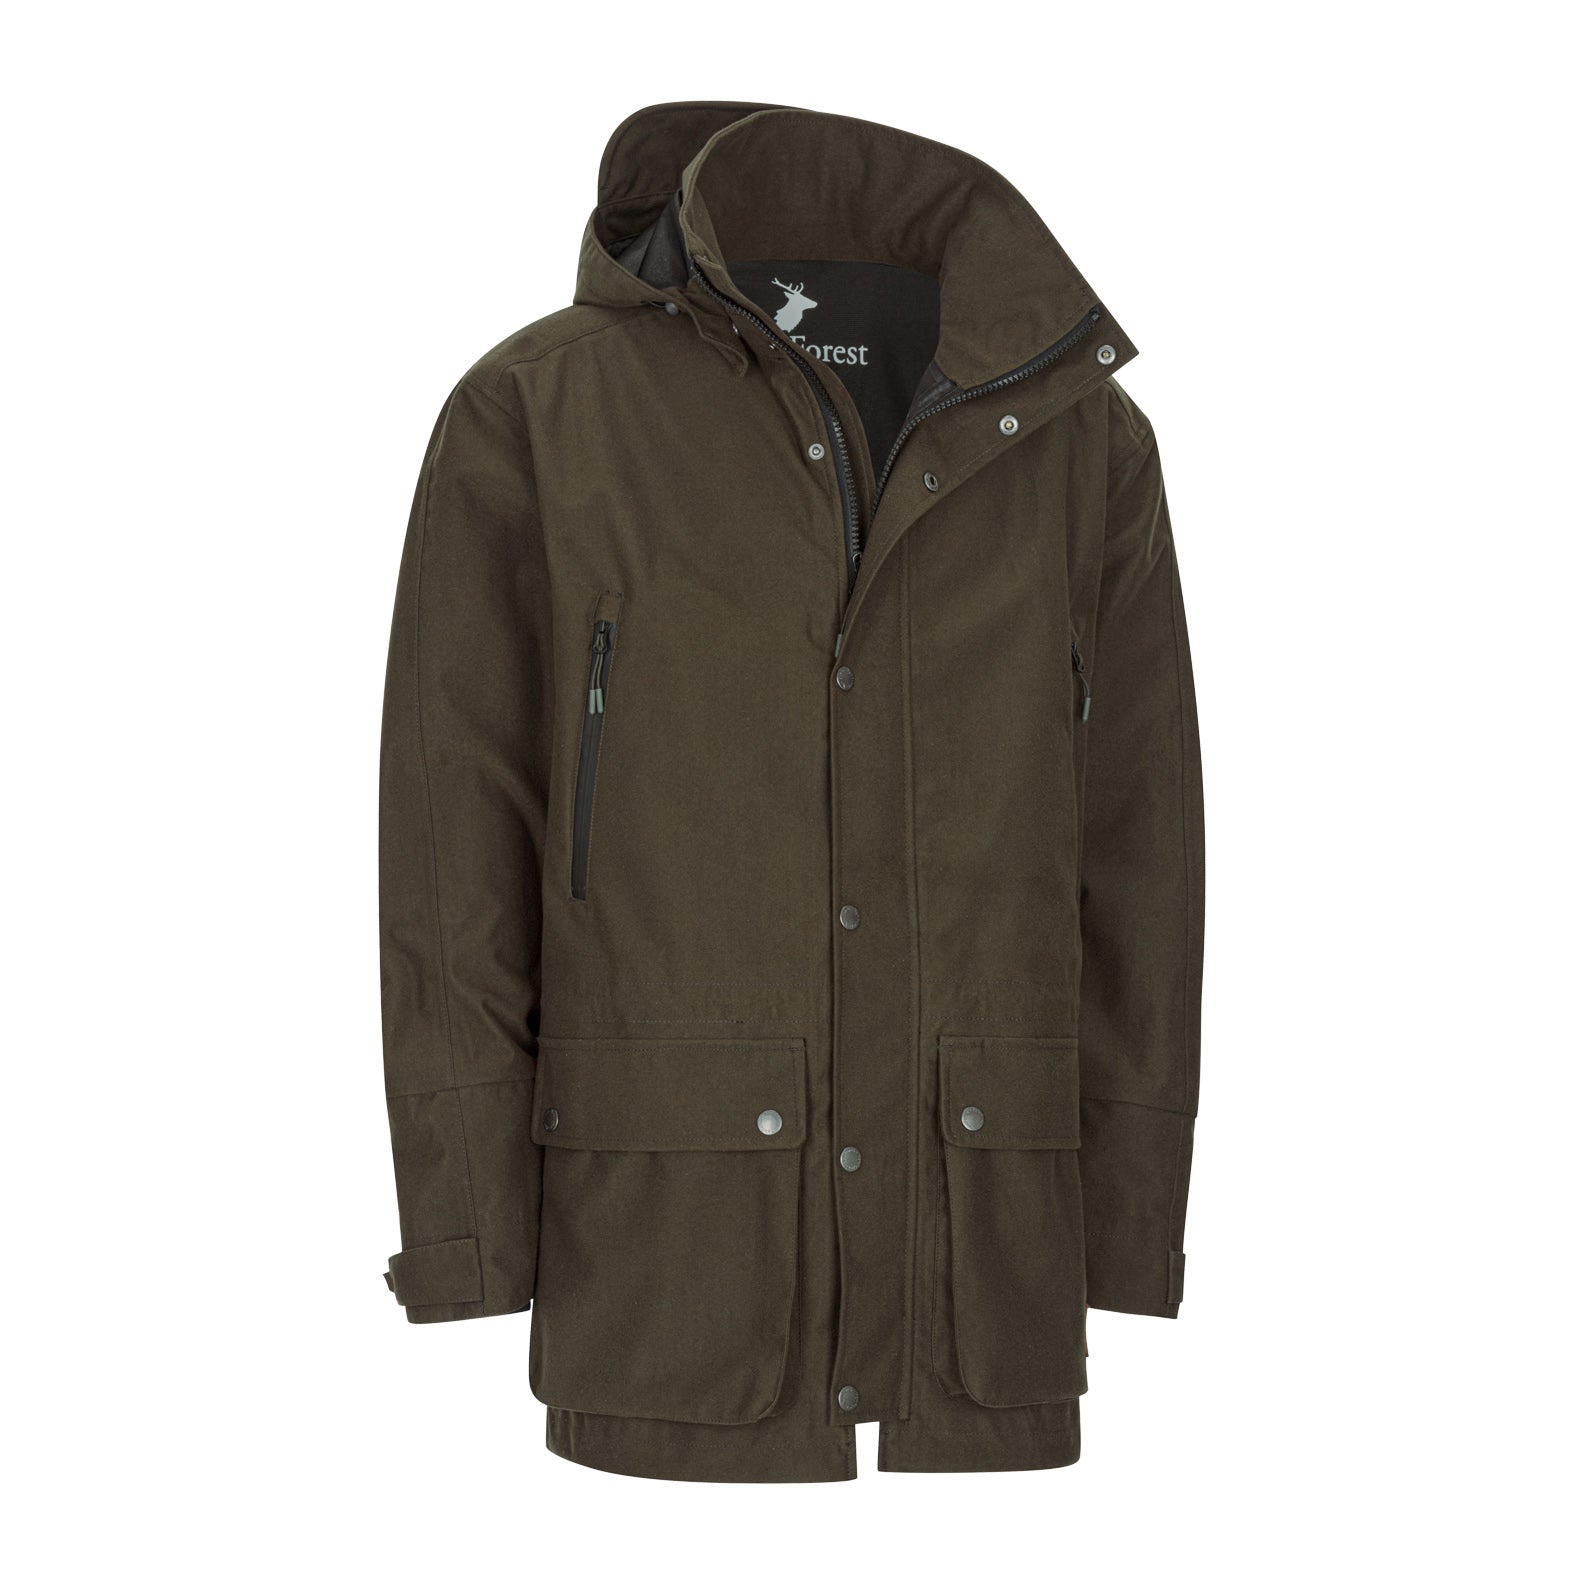 New Forest Country Sport Jacket | New Forest Clothing